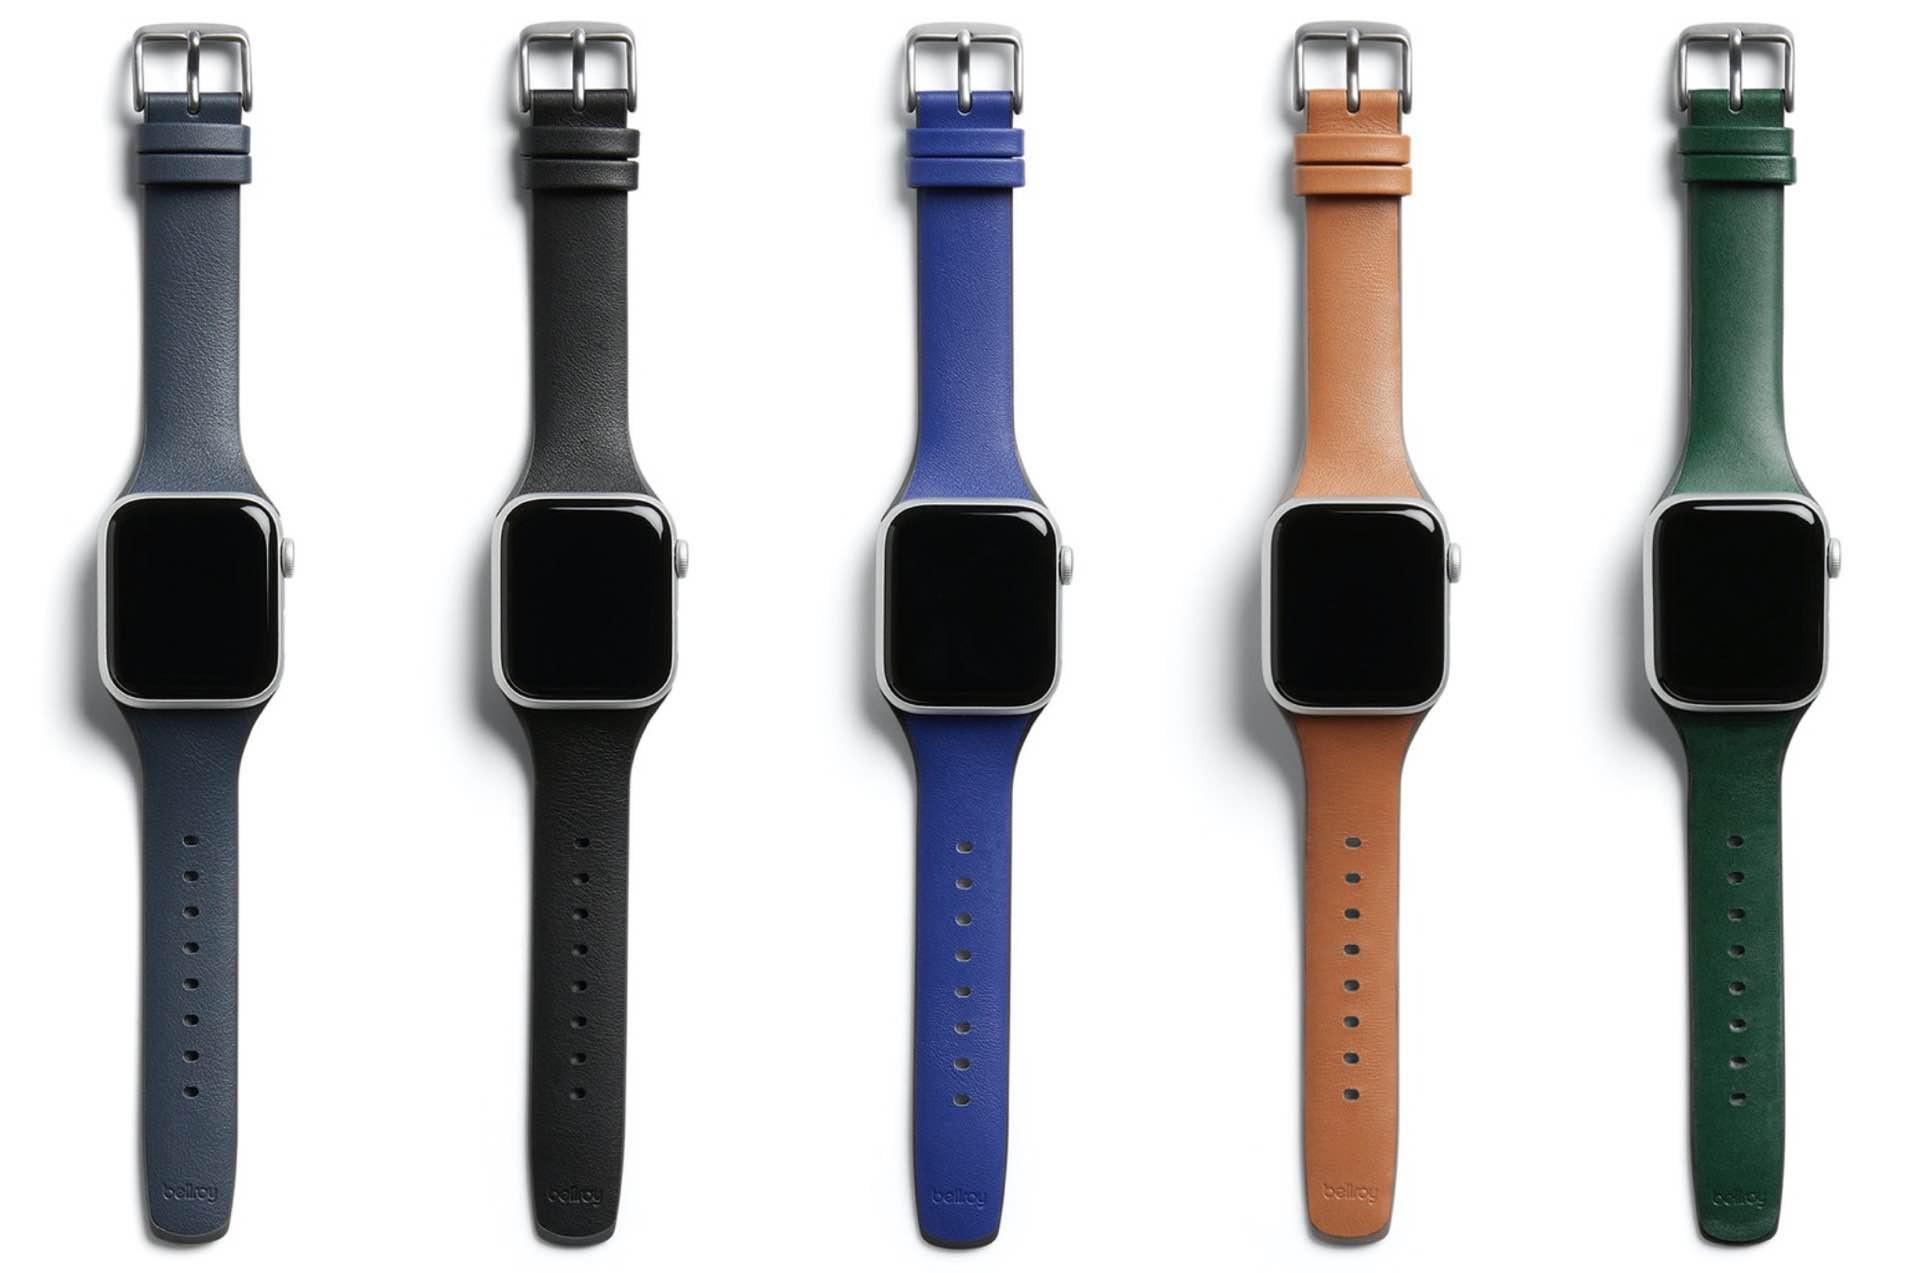 bellroy-leather-polymer-apple-watch-strap-colors